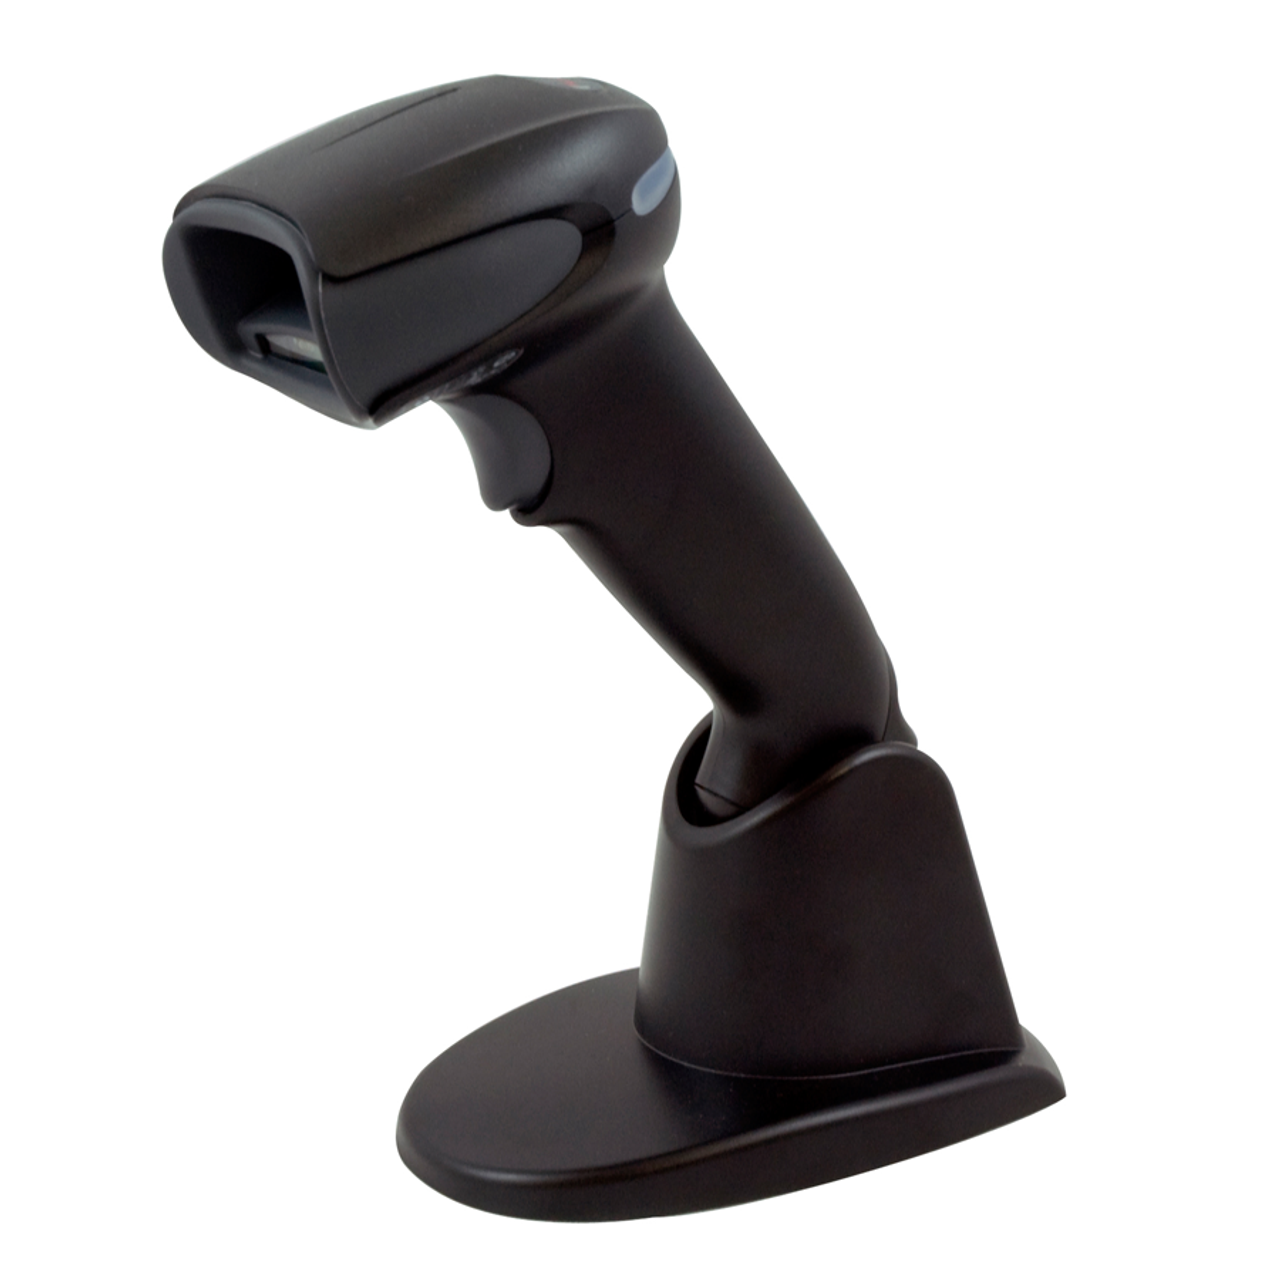 Honeywell Xenon 1900 Area-Imaging Scanner with Ratchet Stand